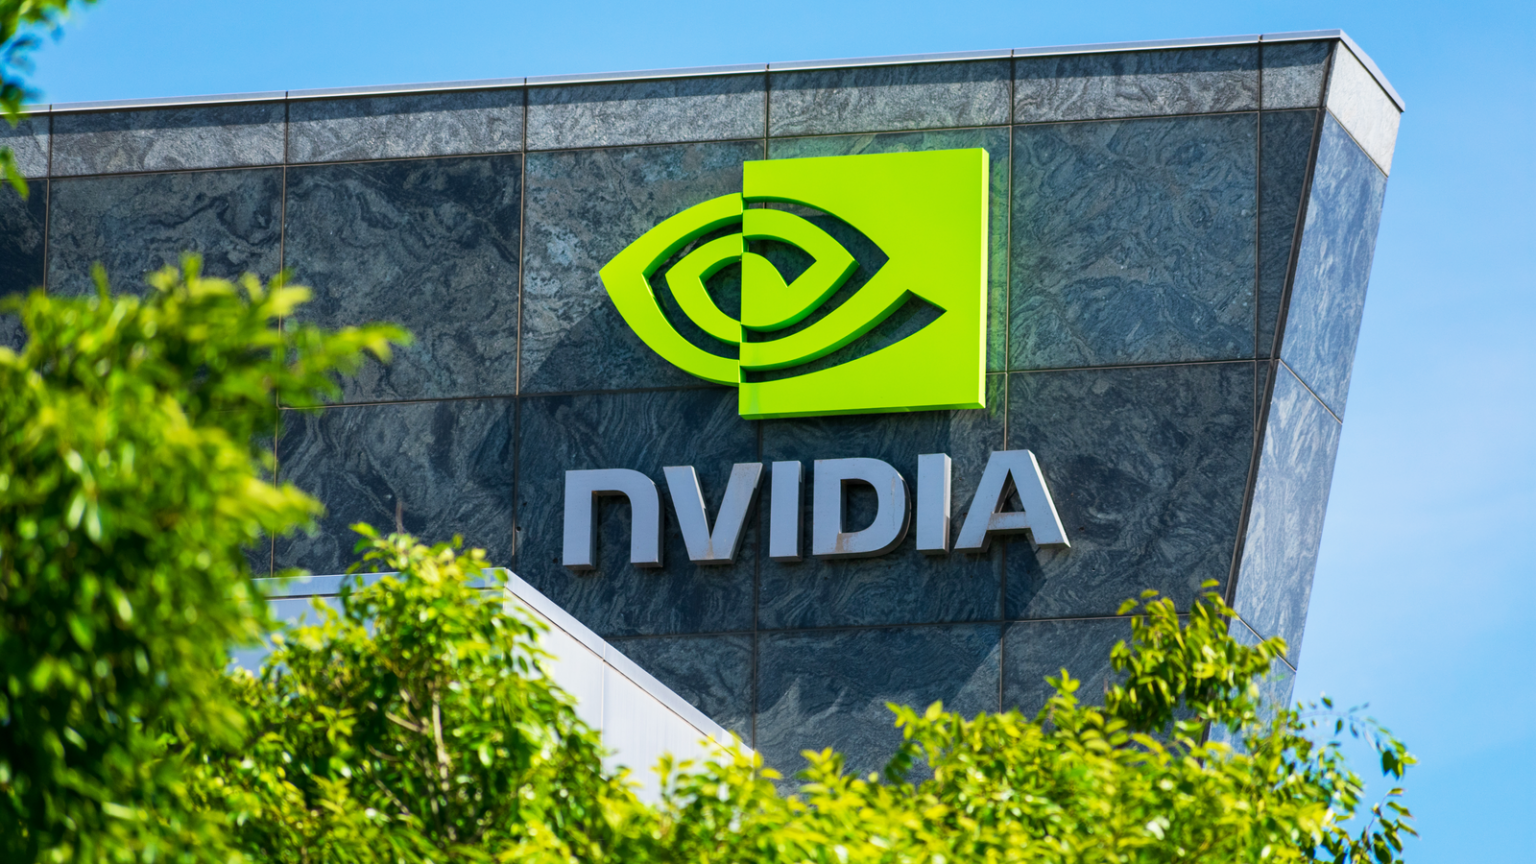 AI's TrillionDollar Baby Is NVDA Stock Overvalued or Just Getting